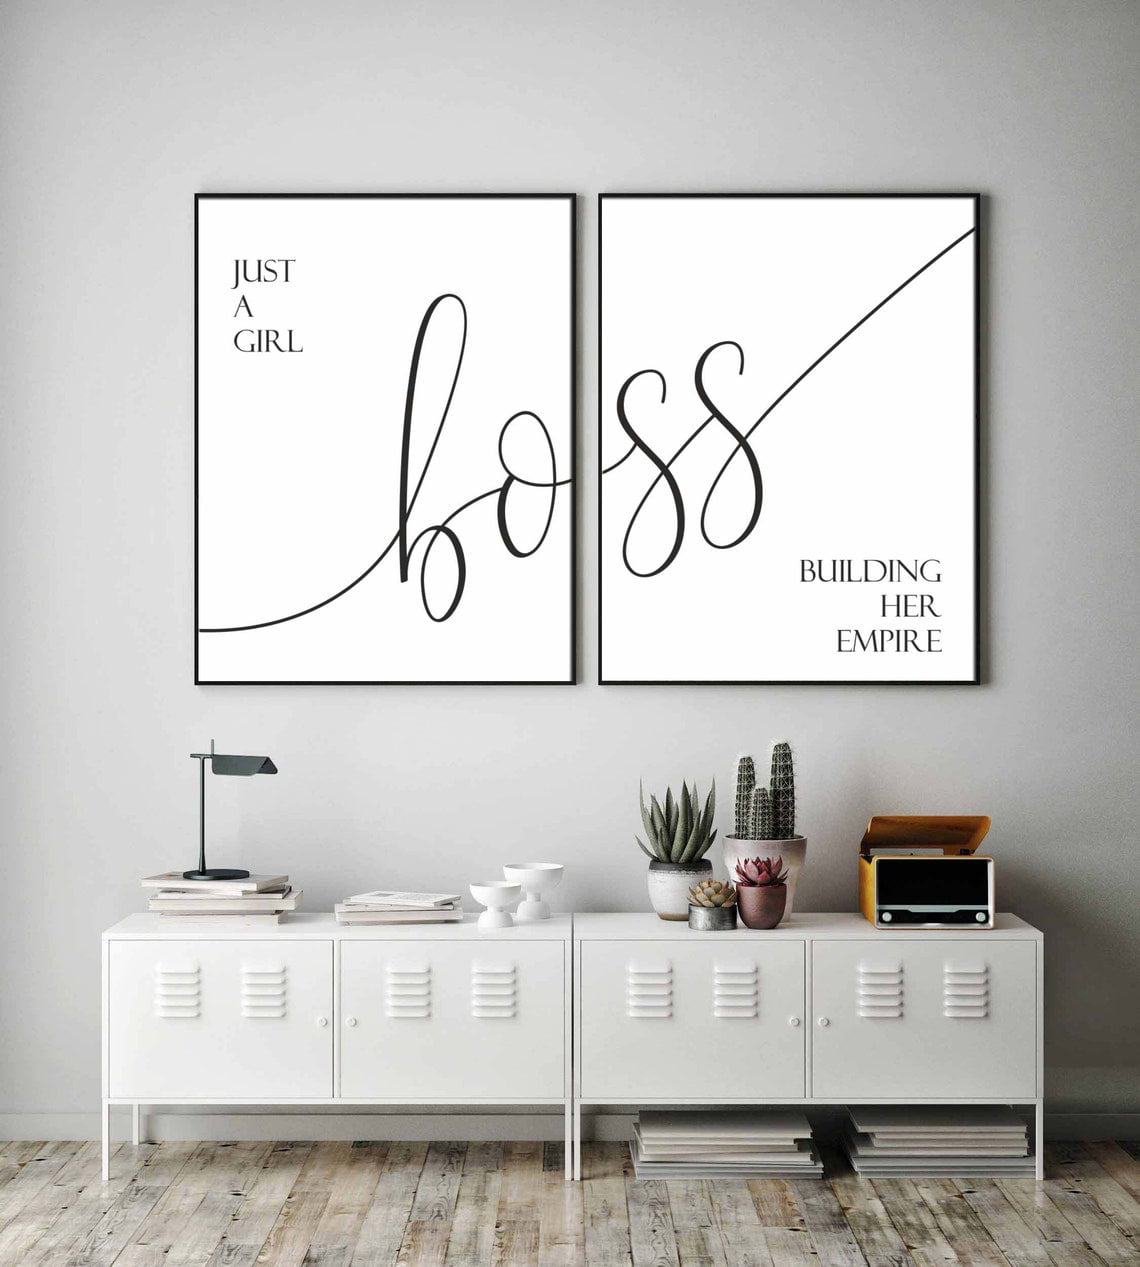 Art Office Gift Girl Boss Lady 2 Unframed Prints Decor Painting Canvas Wall of New Empire Poster for Boss Building For Set A Her Office Just